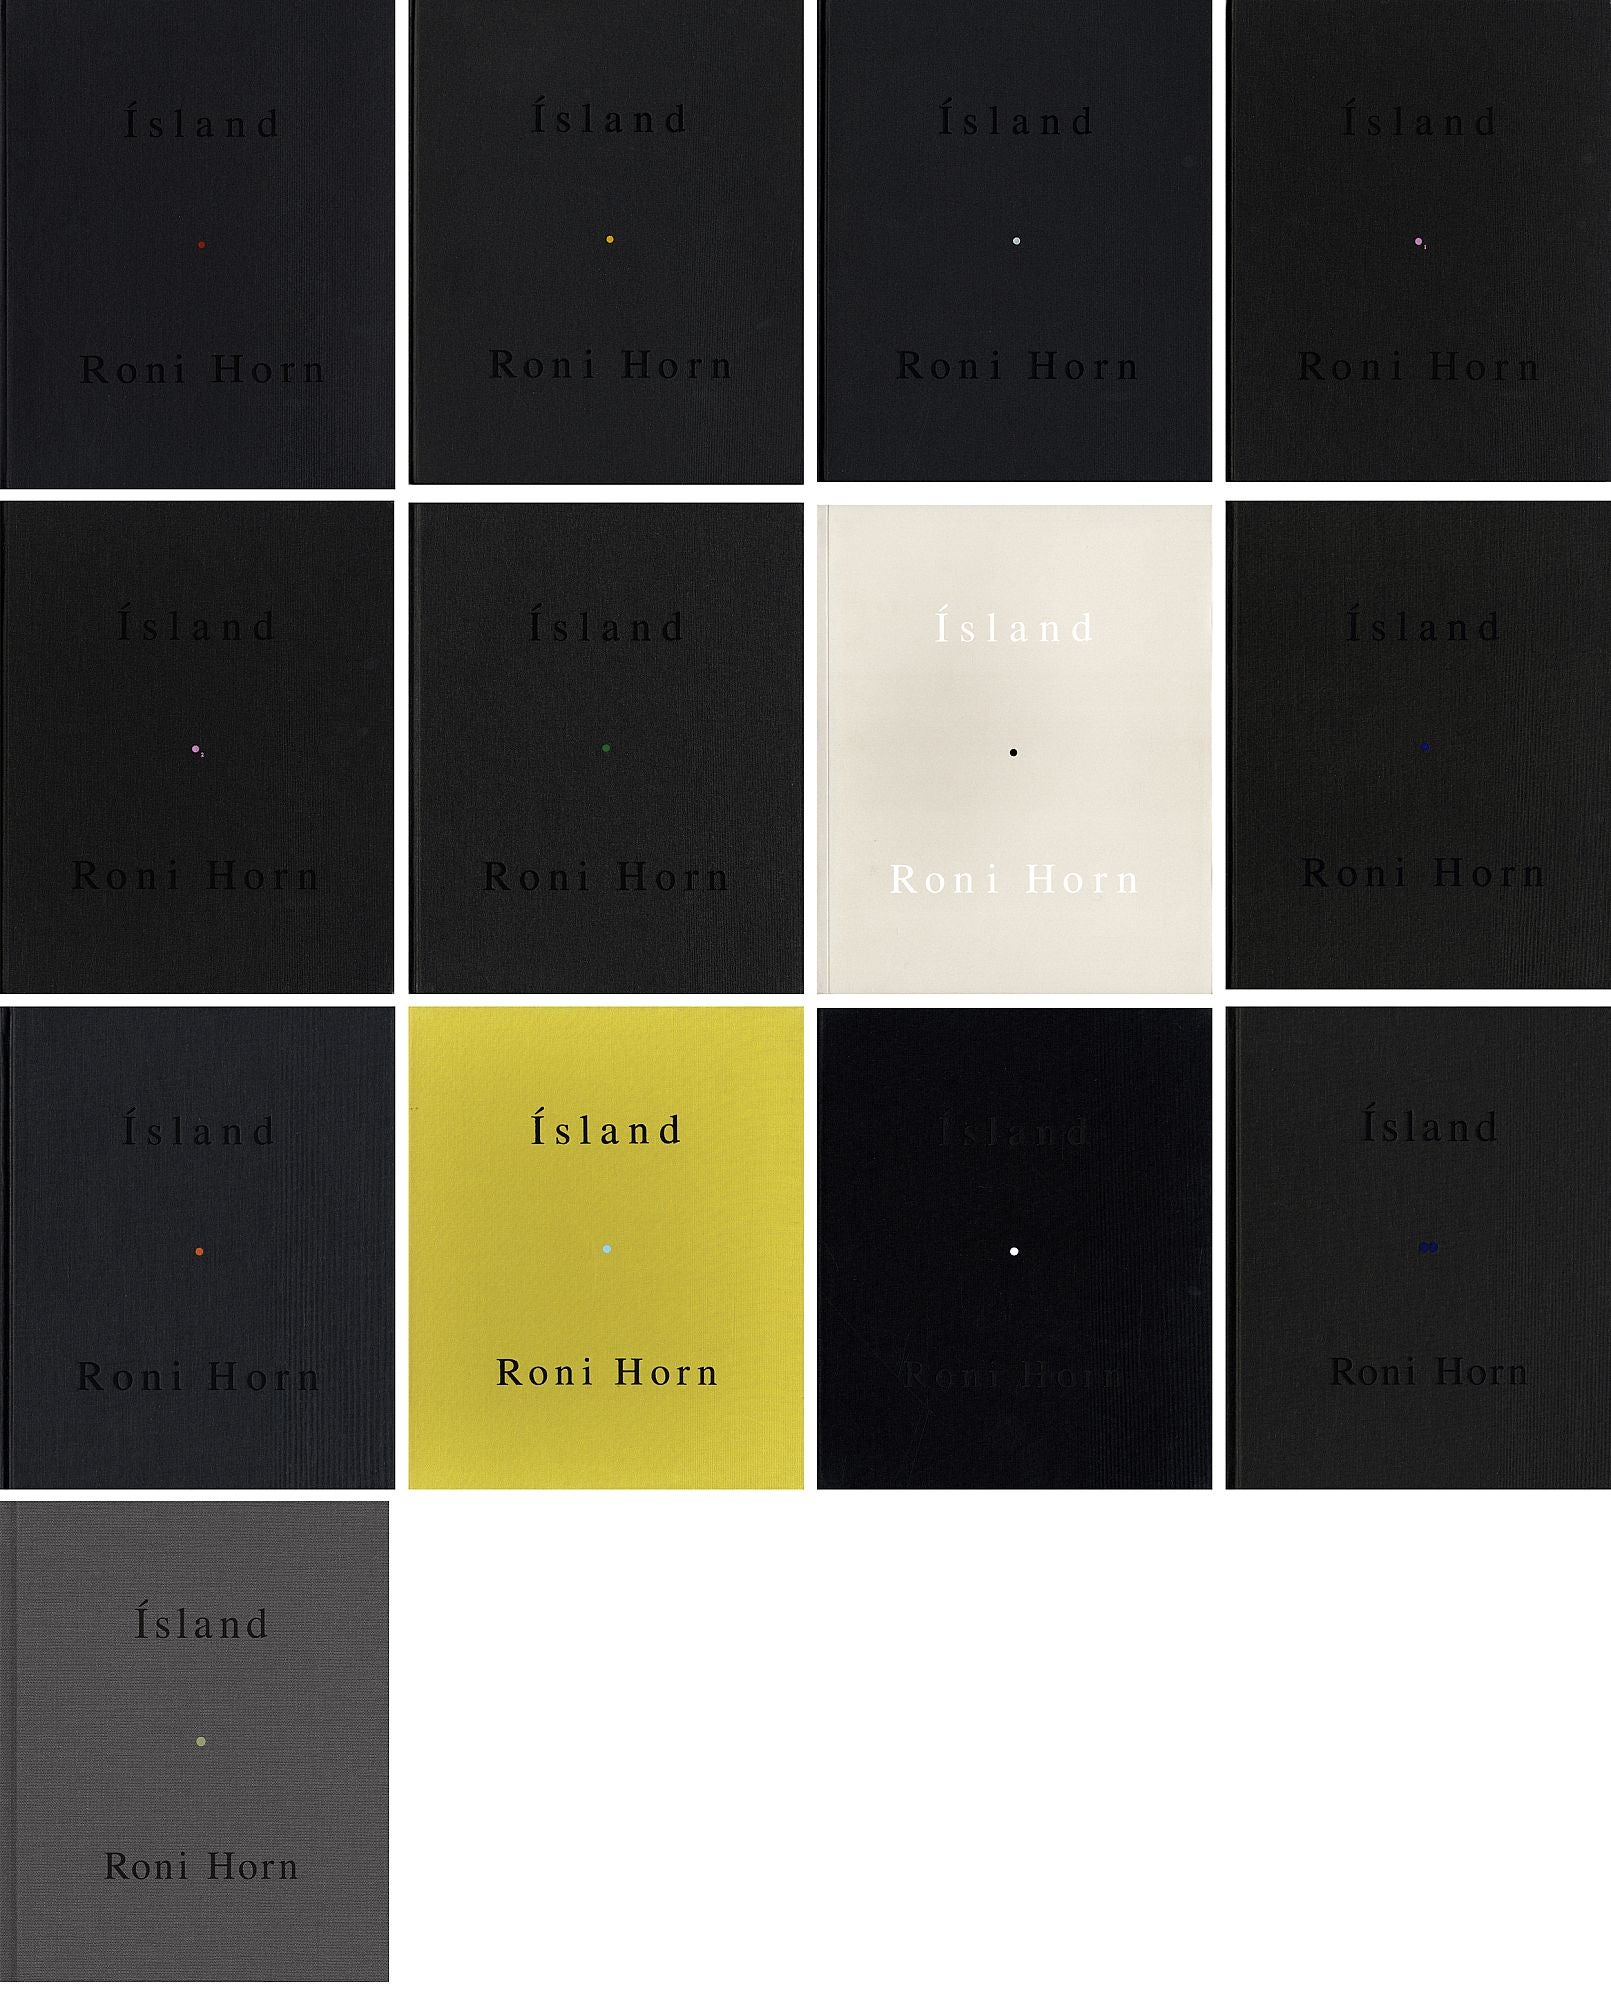 Roni Horn: Ísland (Iceland): To Place 1-11 (Complete Set, with Inner Geography supplement) [all titles SIGNED, all in AS NEW Condition]: 1) Bluff Life; 2) Folds; 3) Lava; 4) Pooling Waters (2 volumes); 5) Verne's Journey; 6) Haraldsdóttir; 7) Arctic Circles; 8) Becoming a Landscape (two volume boxed set); 9) Doubt Box (boxed set); 10) Haraldsdóttir, Part Two; 11) Mother, Wonder; 12) Inner Geography (catalogue supplement)